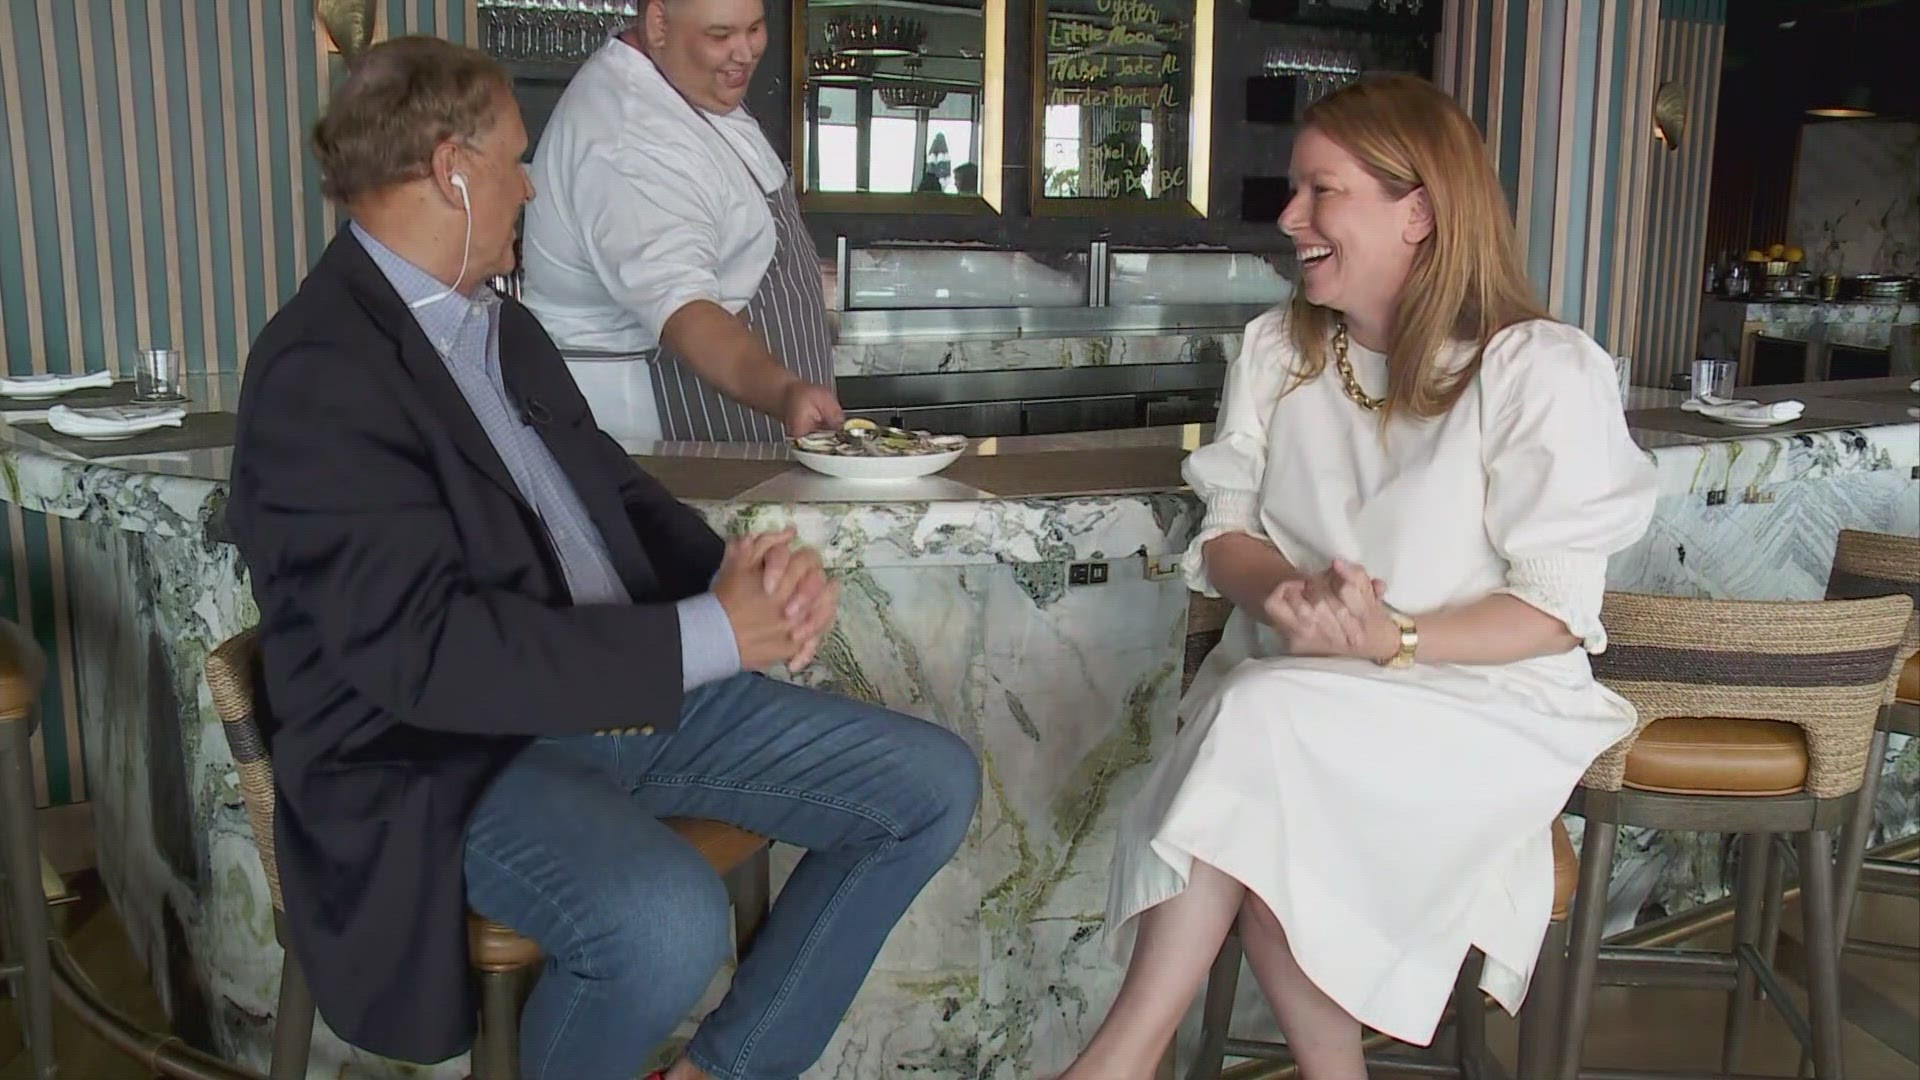 WWLTV sits down with Mali Carow, General Manager Four Seasons Hotel New Orleans, to highlight their hot new restaurant.